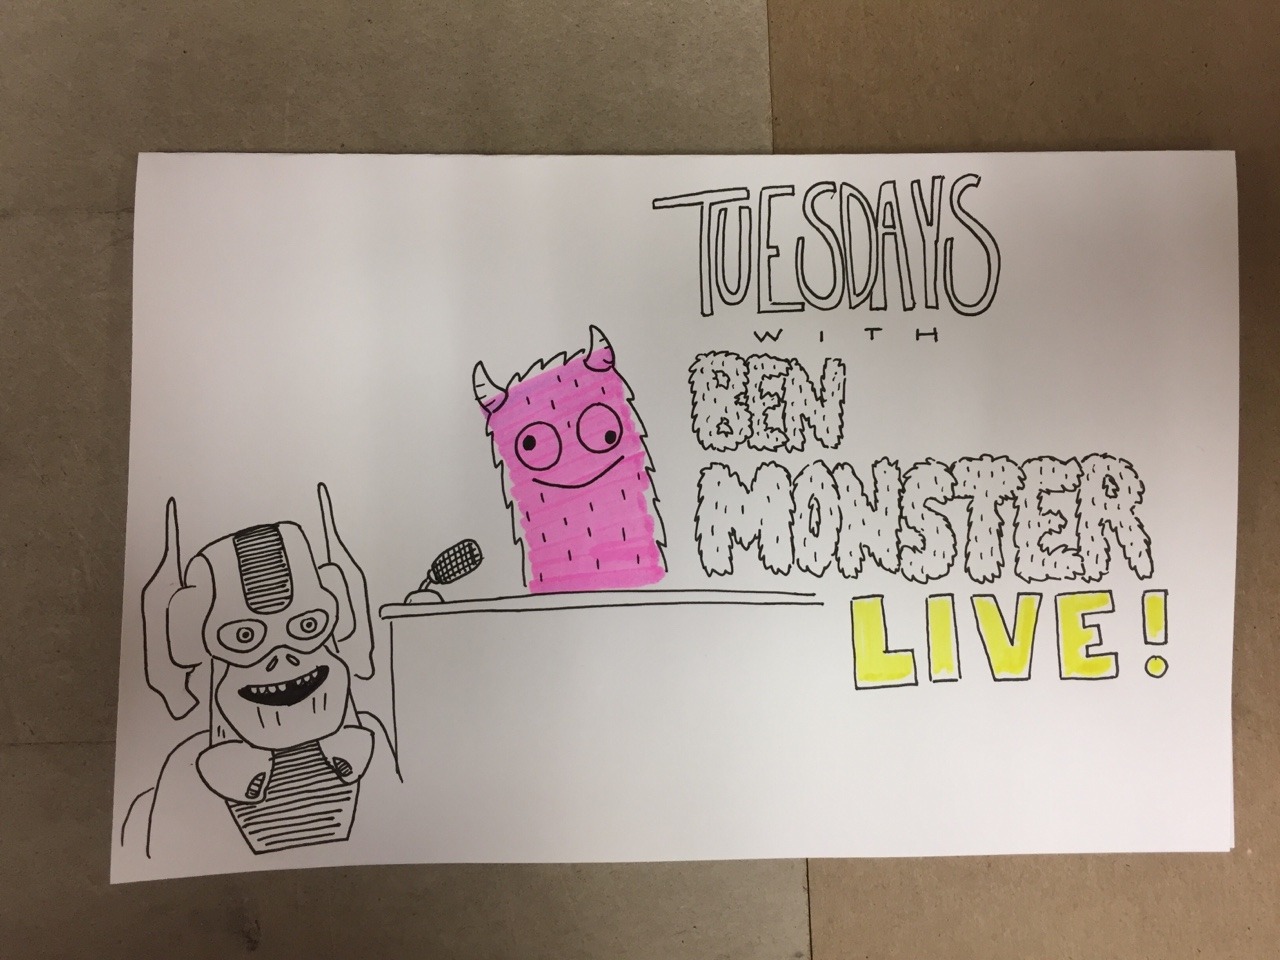 watch tuesdays with ben monster a live puppet show about to go online! https://youtu.be/Th0qurhlwys watch and call us.